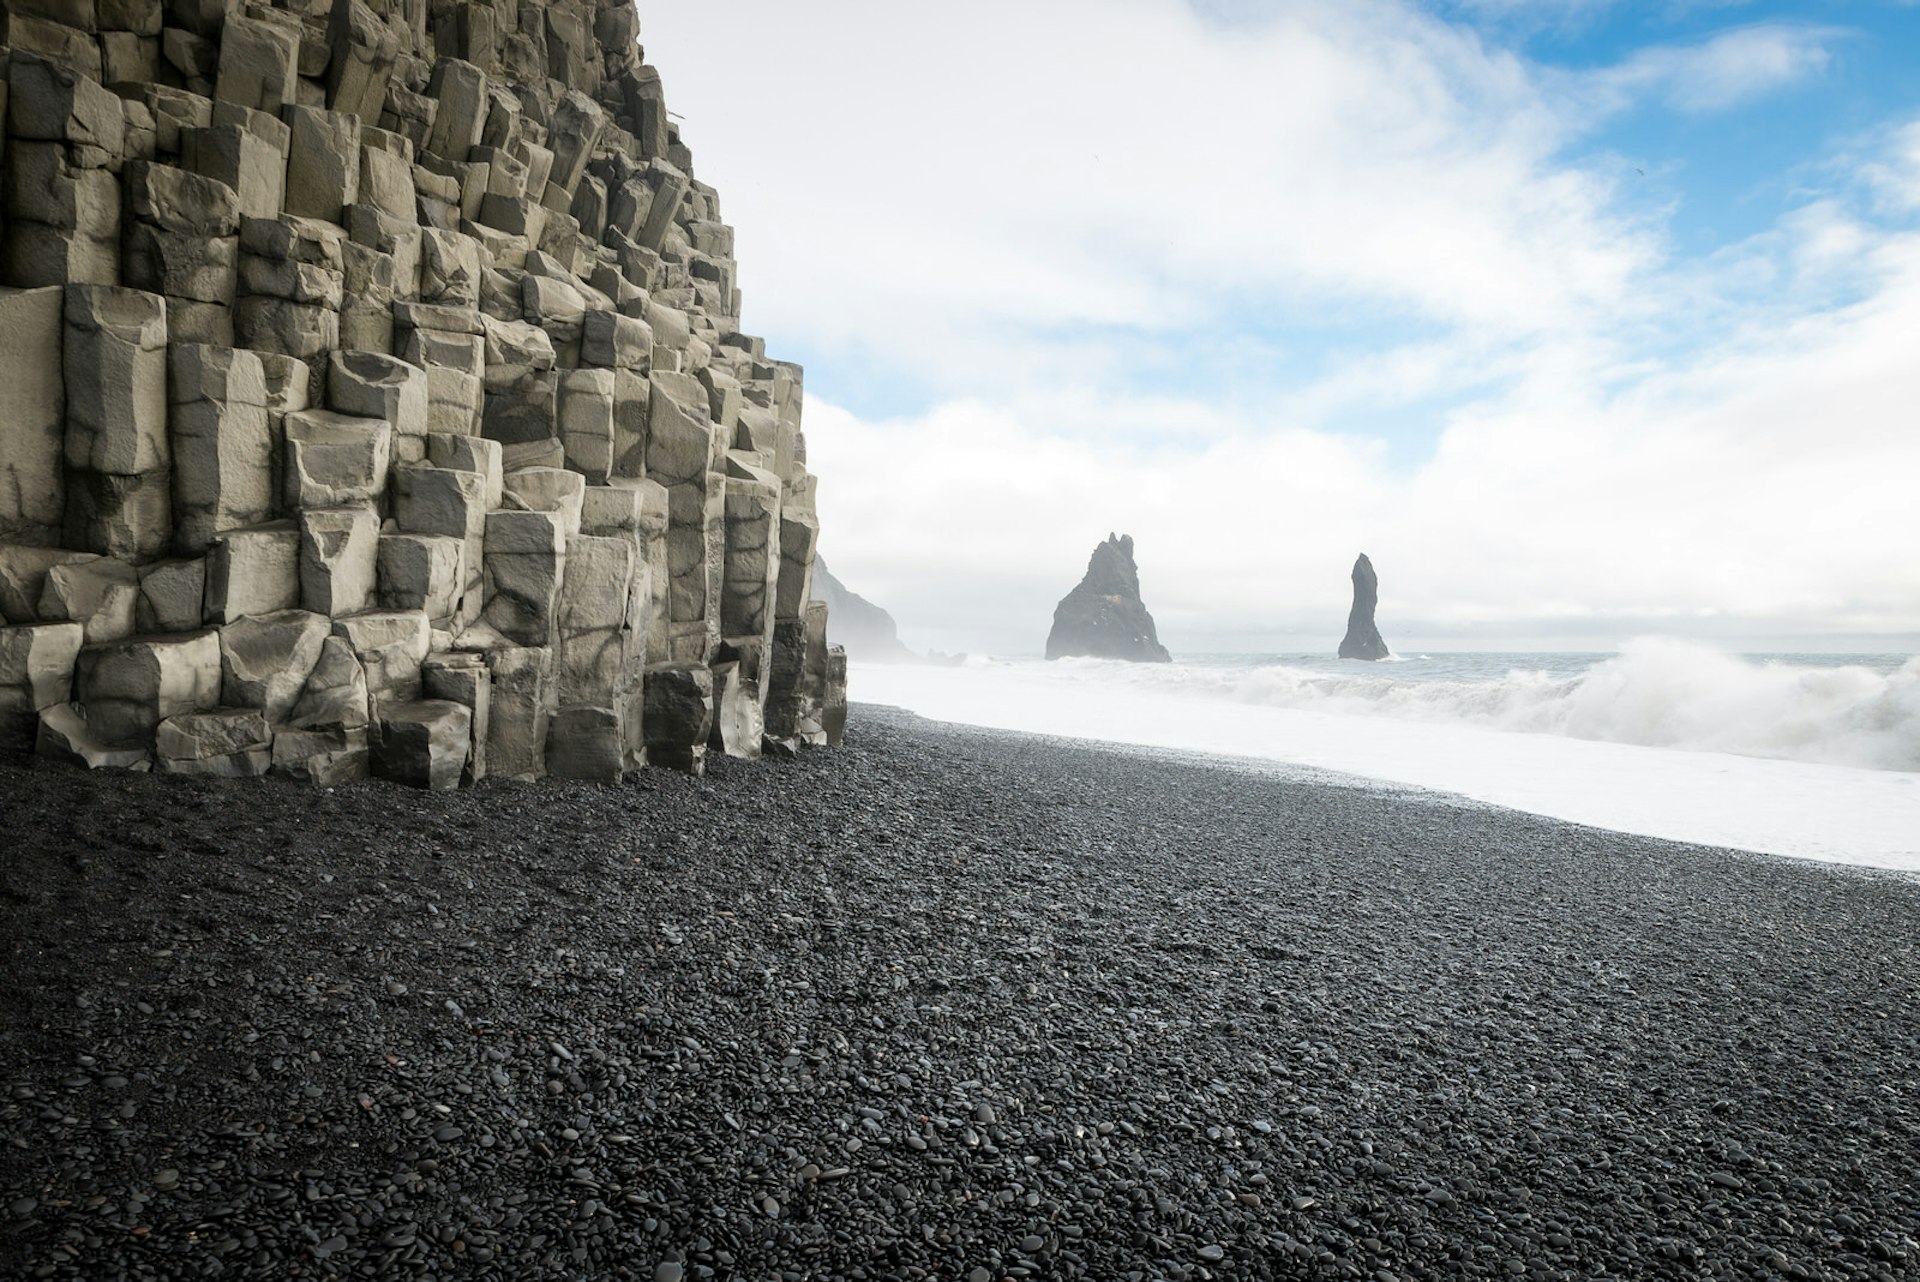 The craggy cliffs and black sand of Reynisfjara beach, Iceland © Elena Pueyo / Getty Images